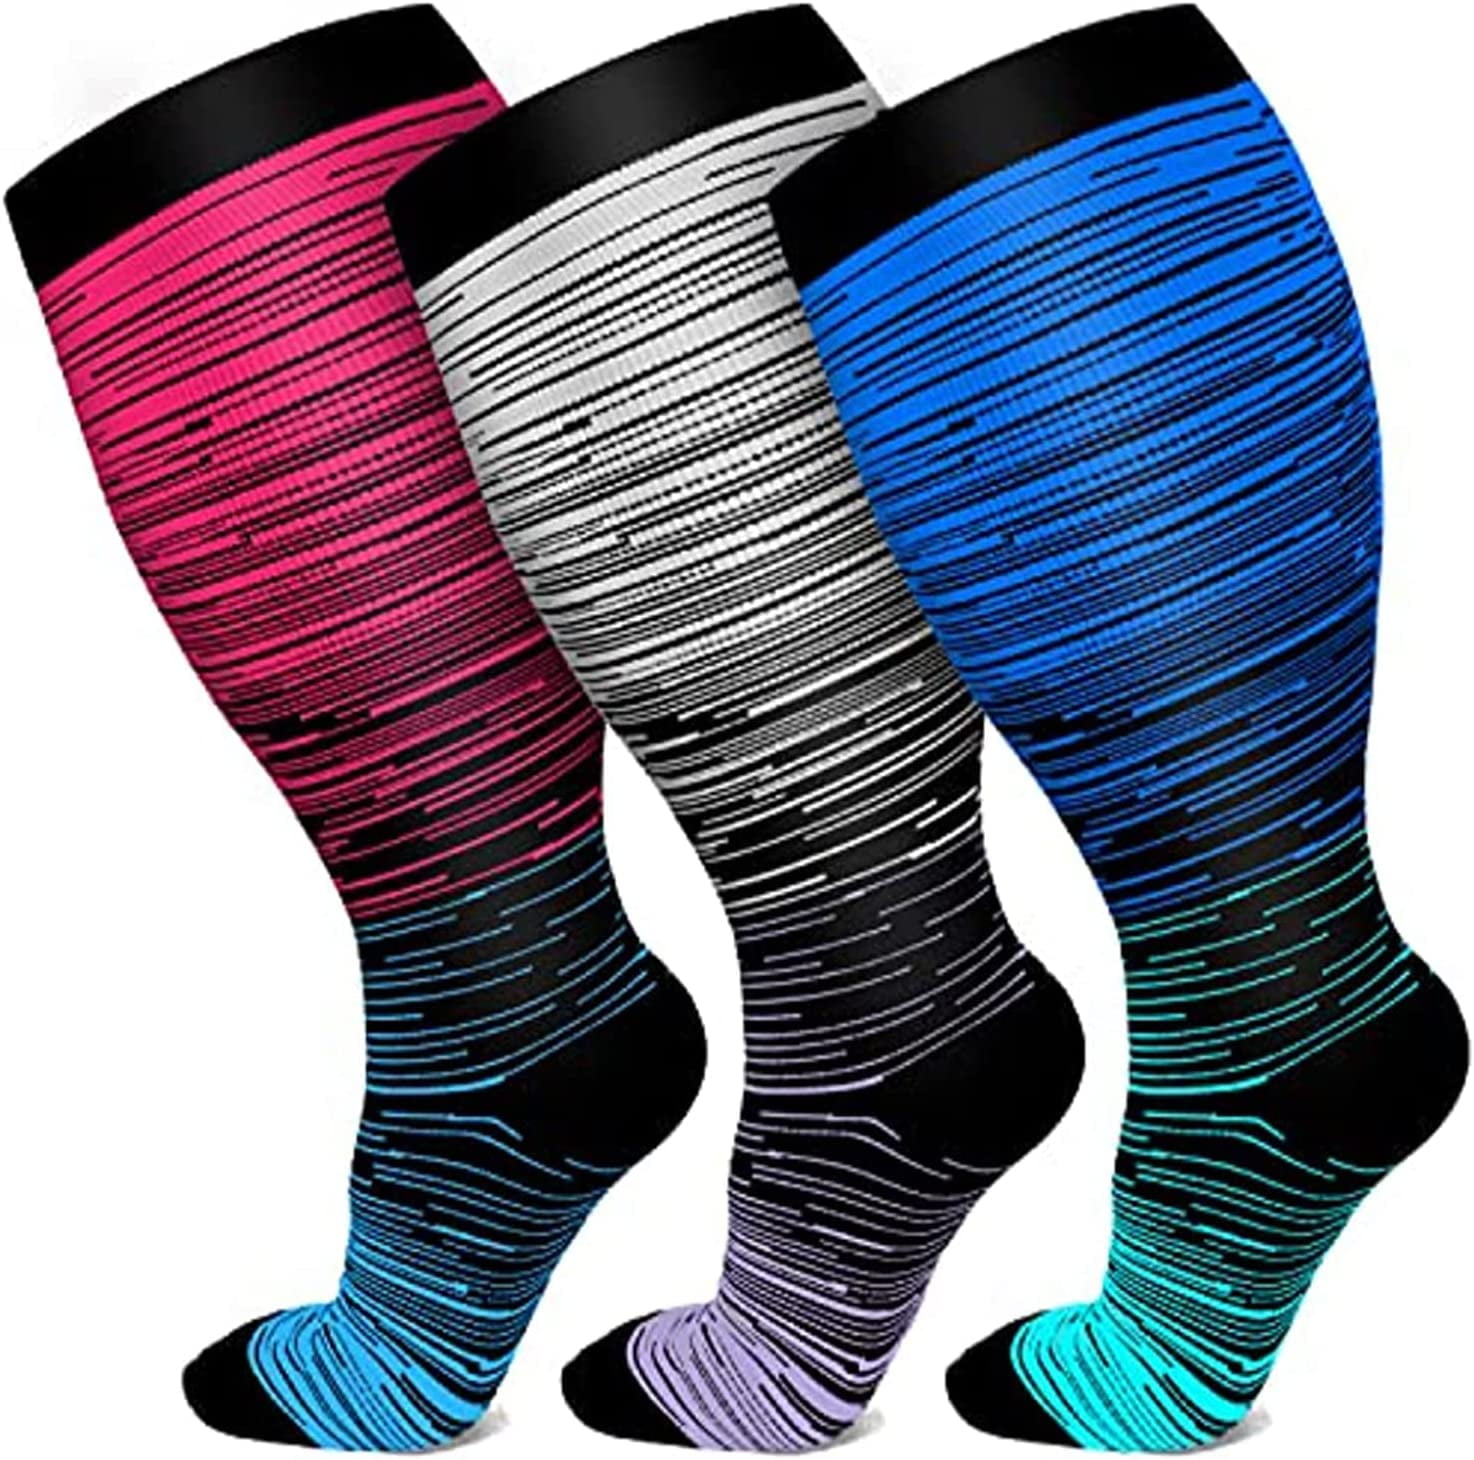 Extra Wide Calf Compression Socks for Women & Men, Plus Size